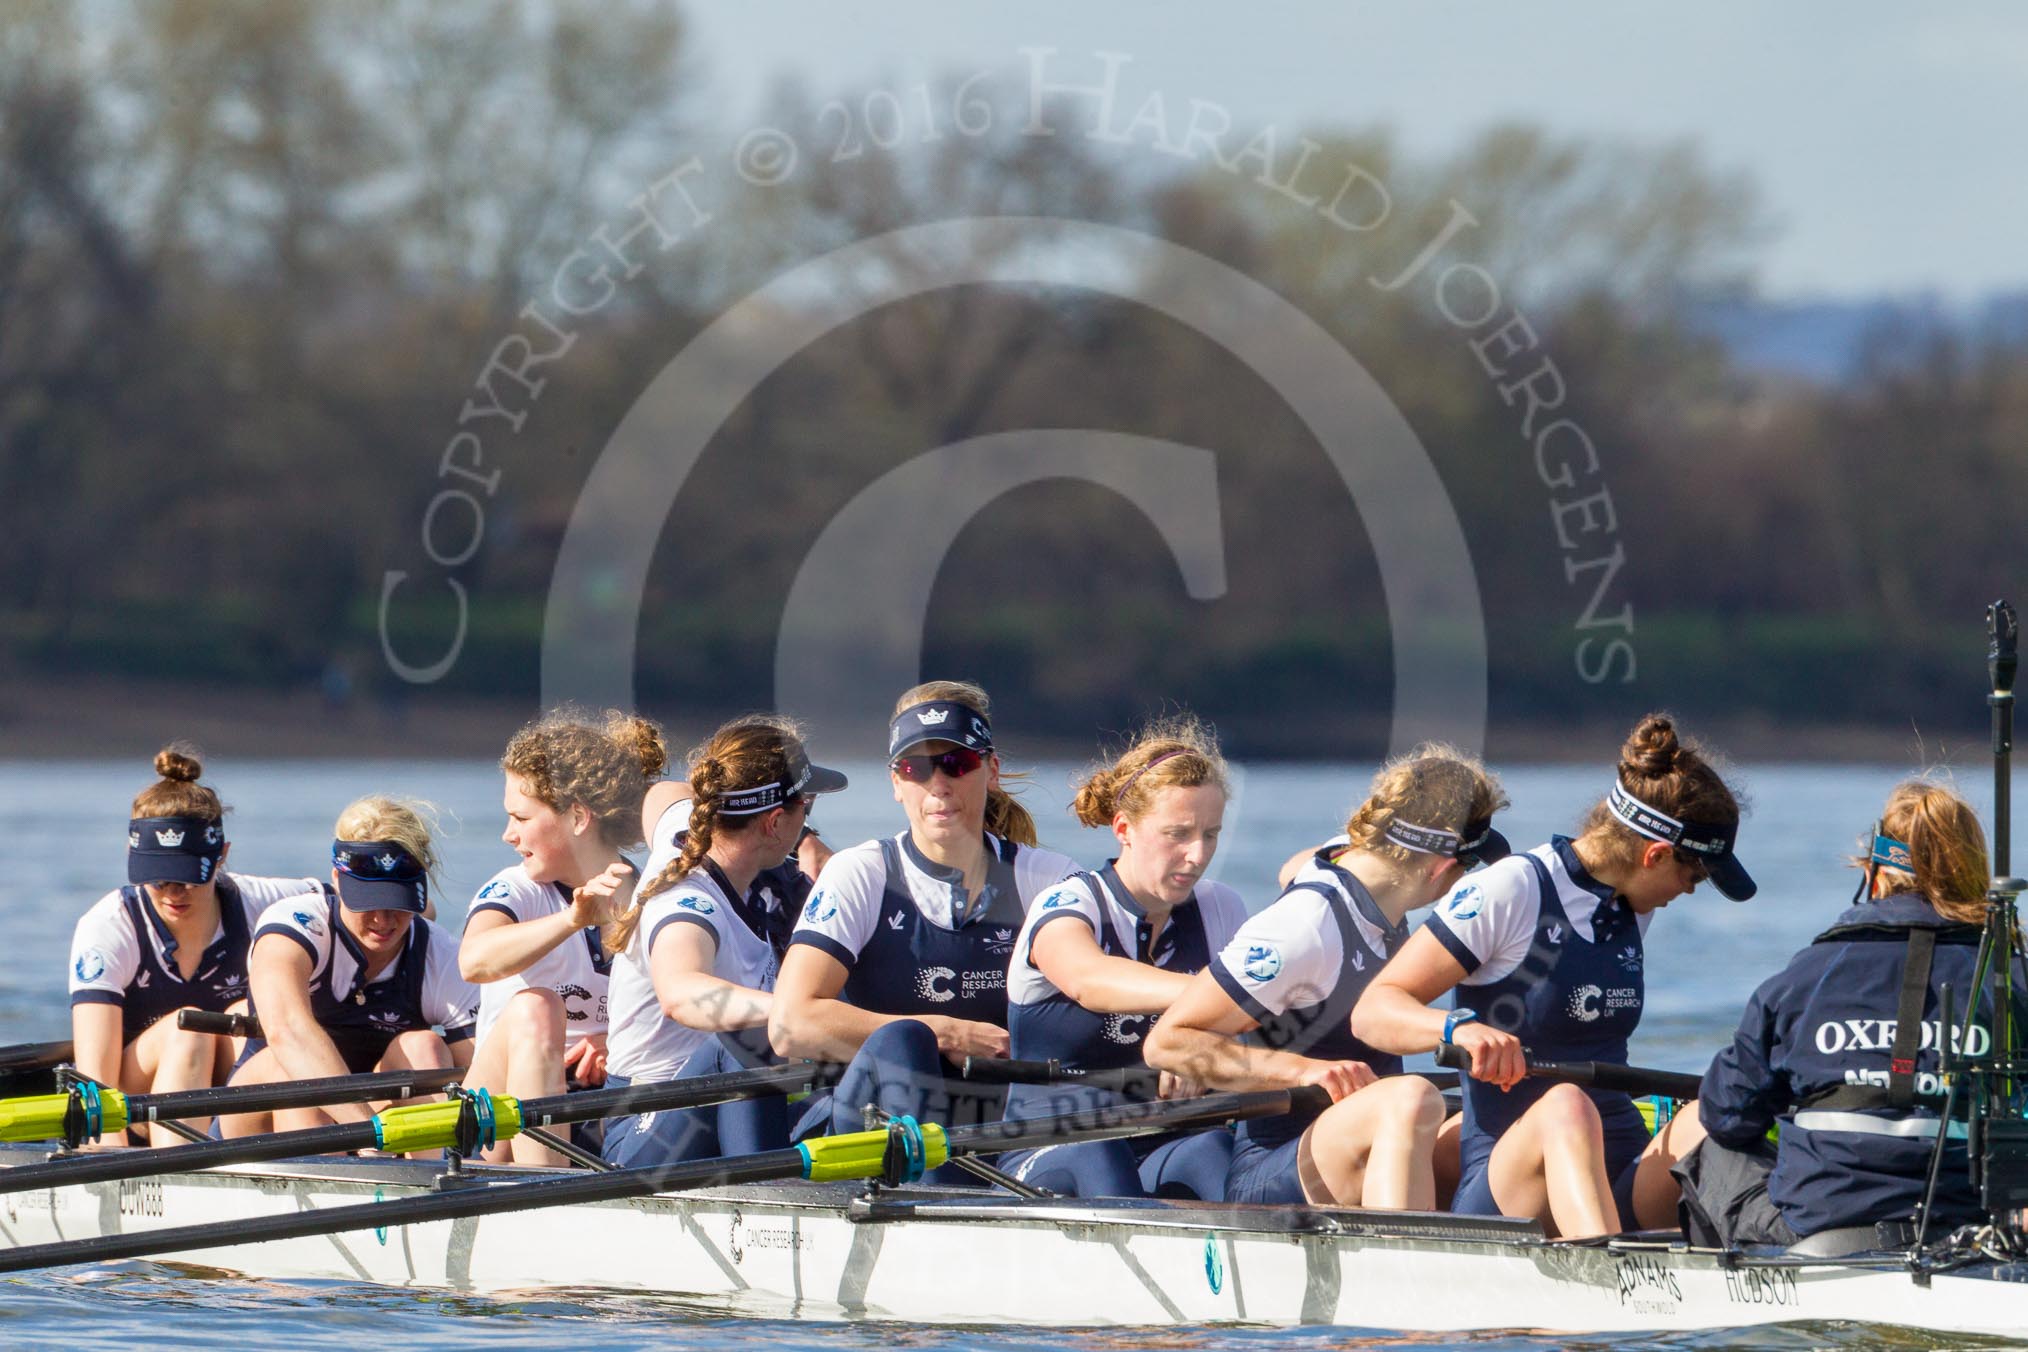 The Boat Race season 2016 -  The Cancer Research Women's Boat Race.
River Thames between Putney Bridge and Mortlake,
London SW15,

United Kingdom,
on 27 March 2016 at 14:04, image #141